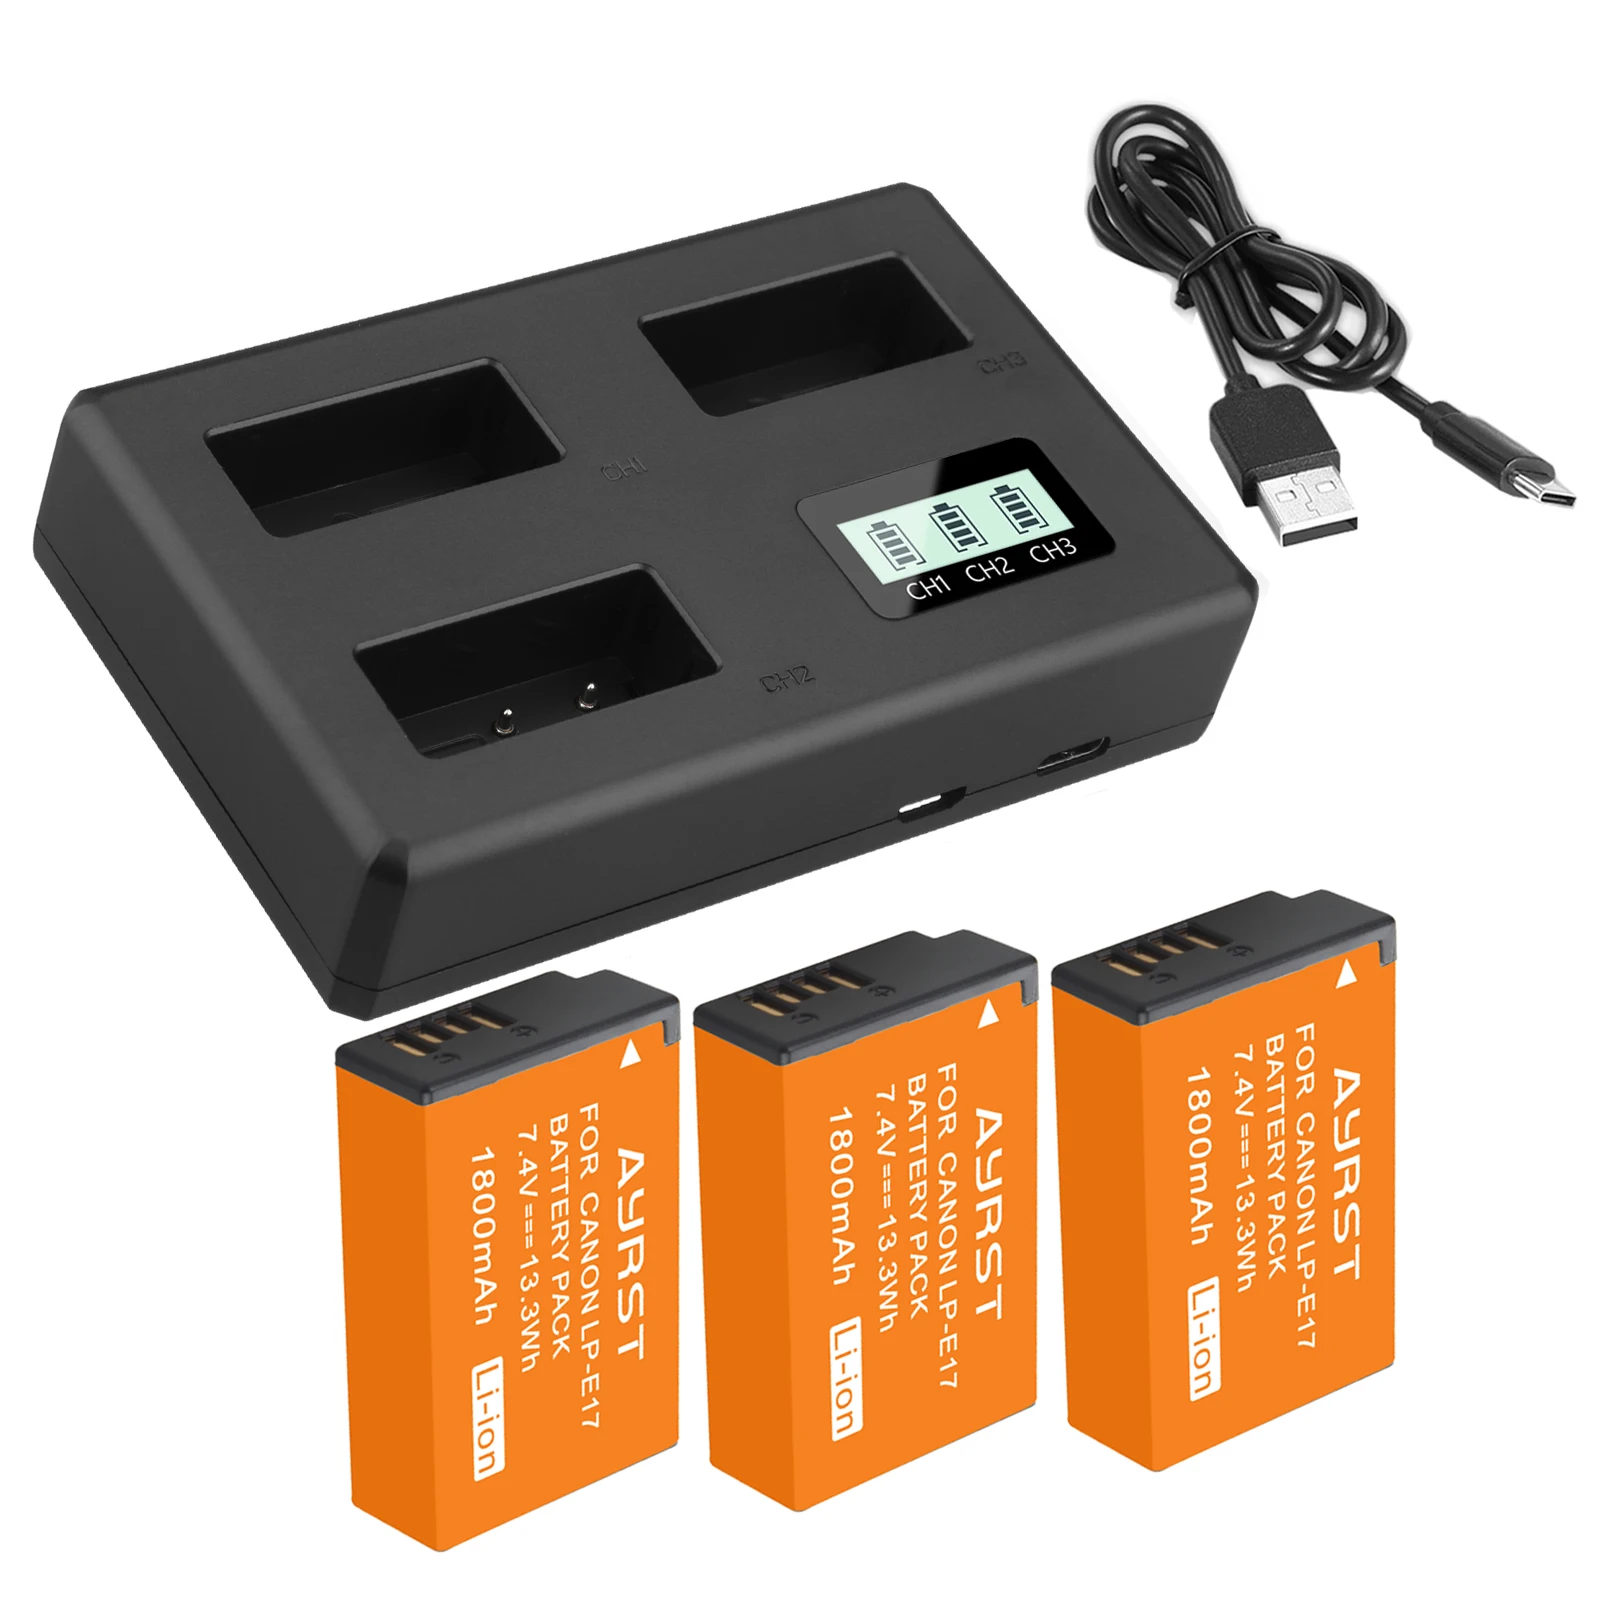 

LPE17 LP E17 LP-E17 Battery+3 Channel Charger for Canon EOS 200D M3 M6 750D 760D T6i T6s 800D 8000D Kiss X8i Cameras